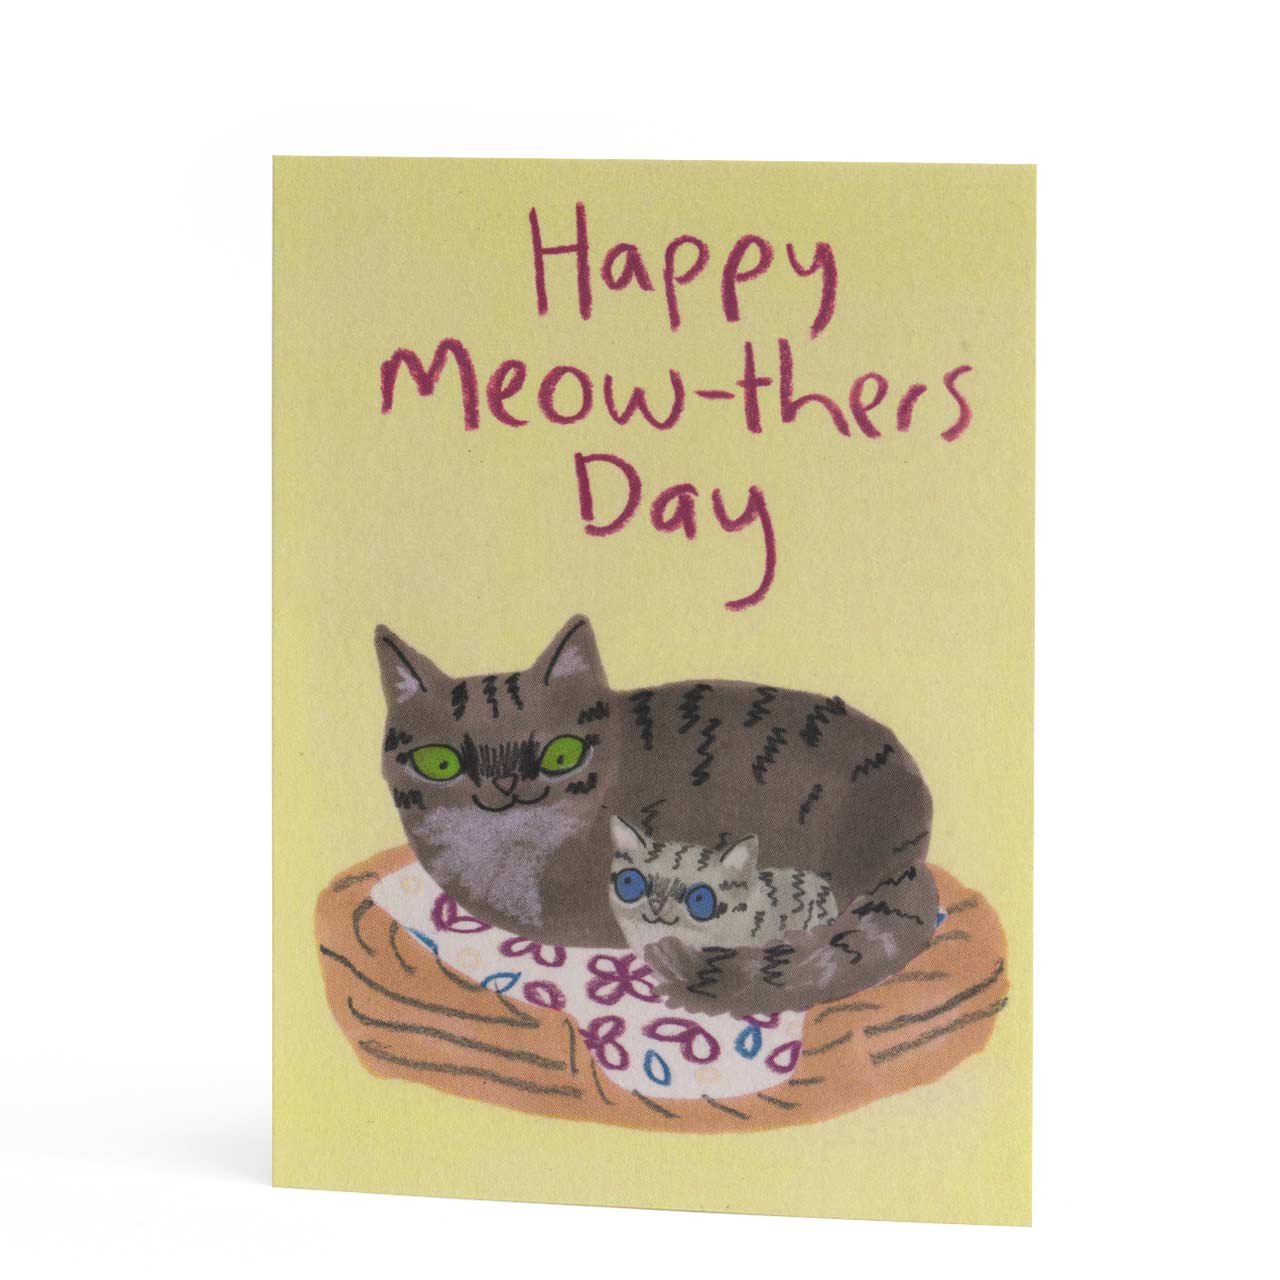 Happy Meow-thers Day Greeting Card